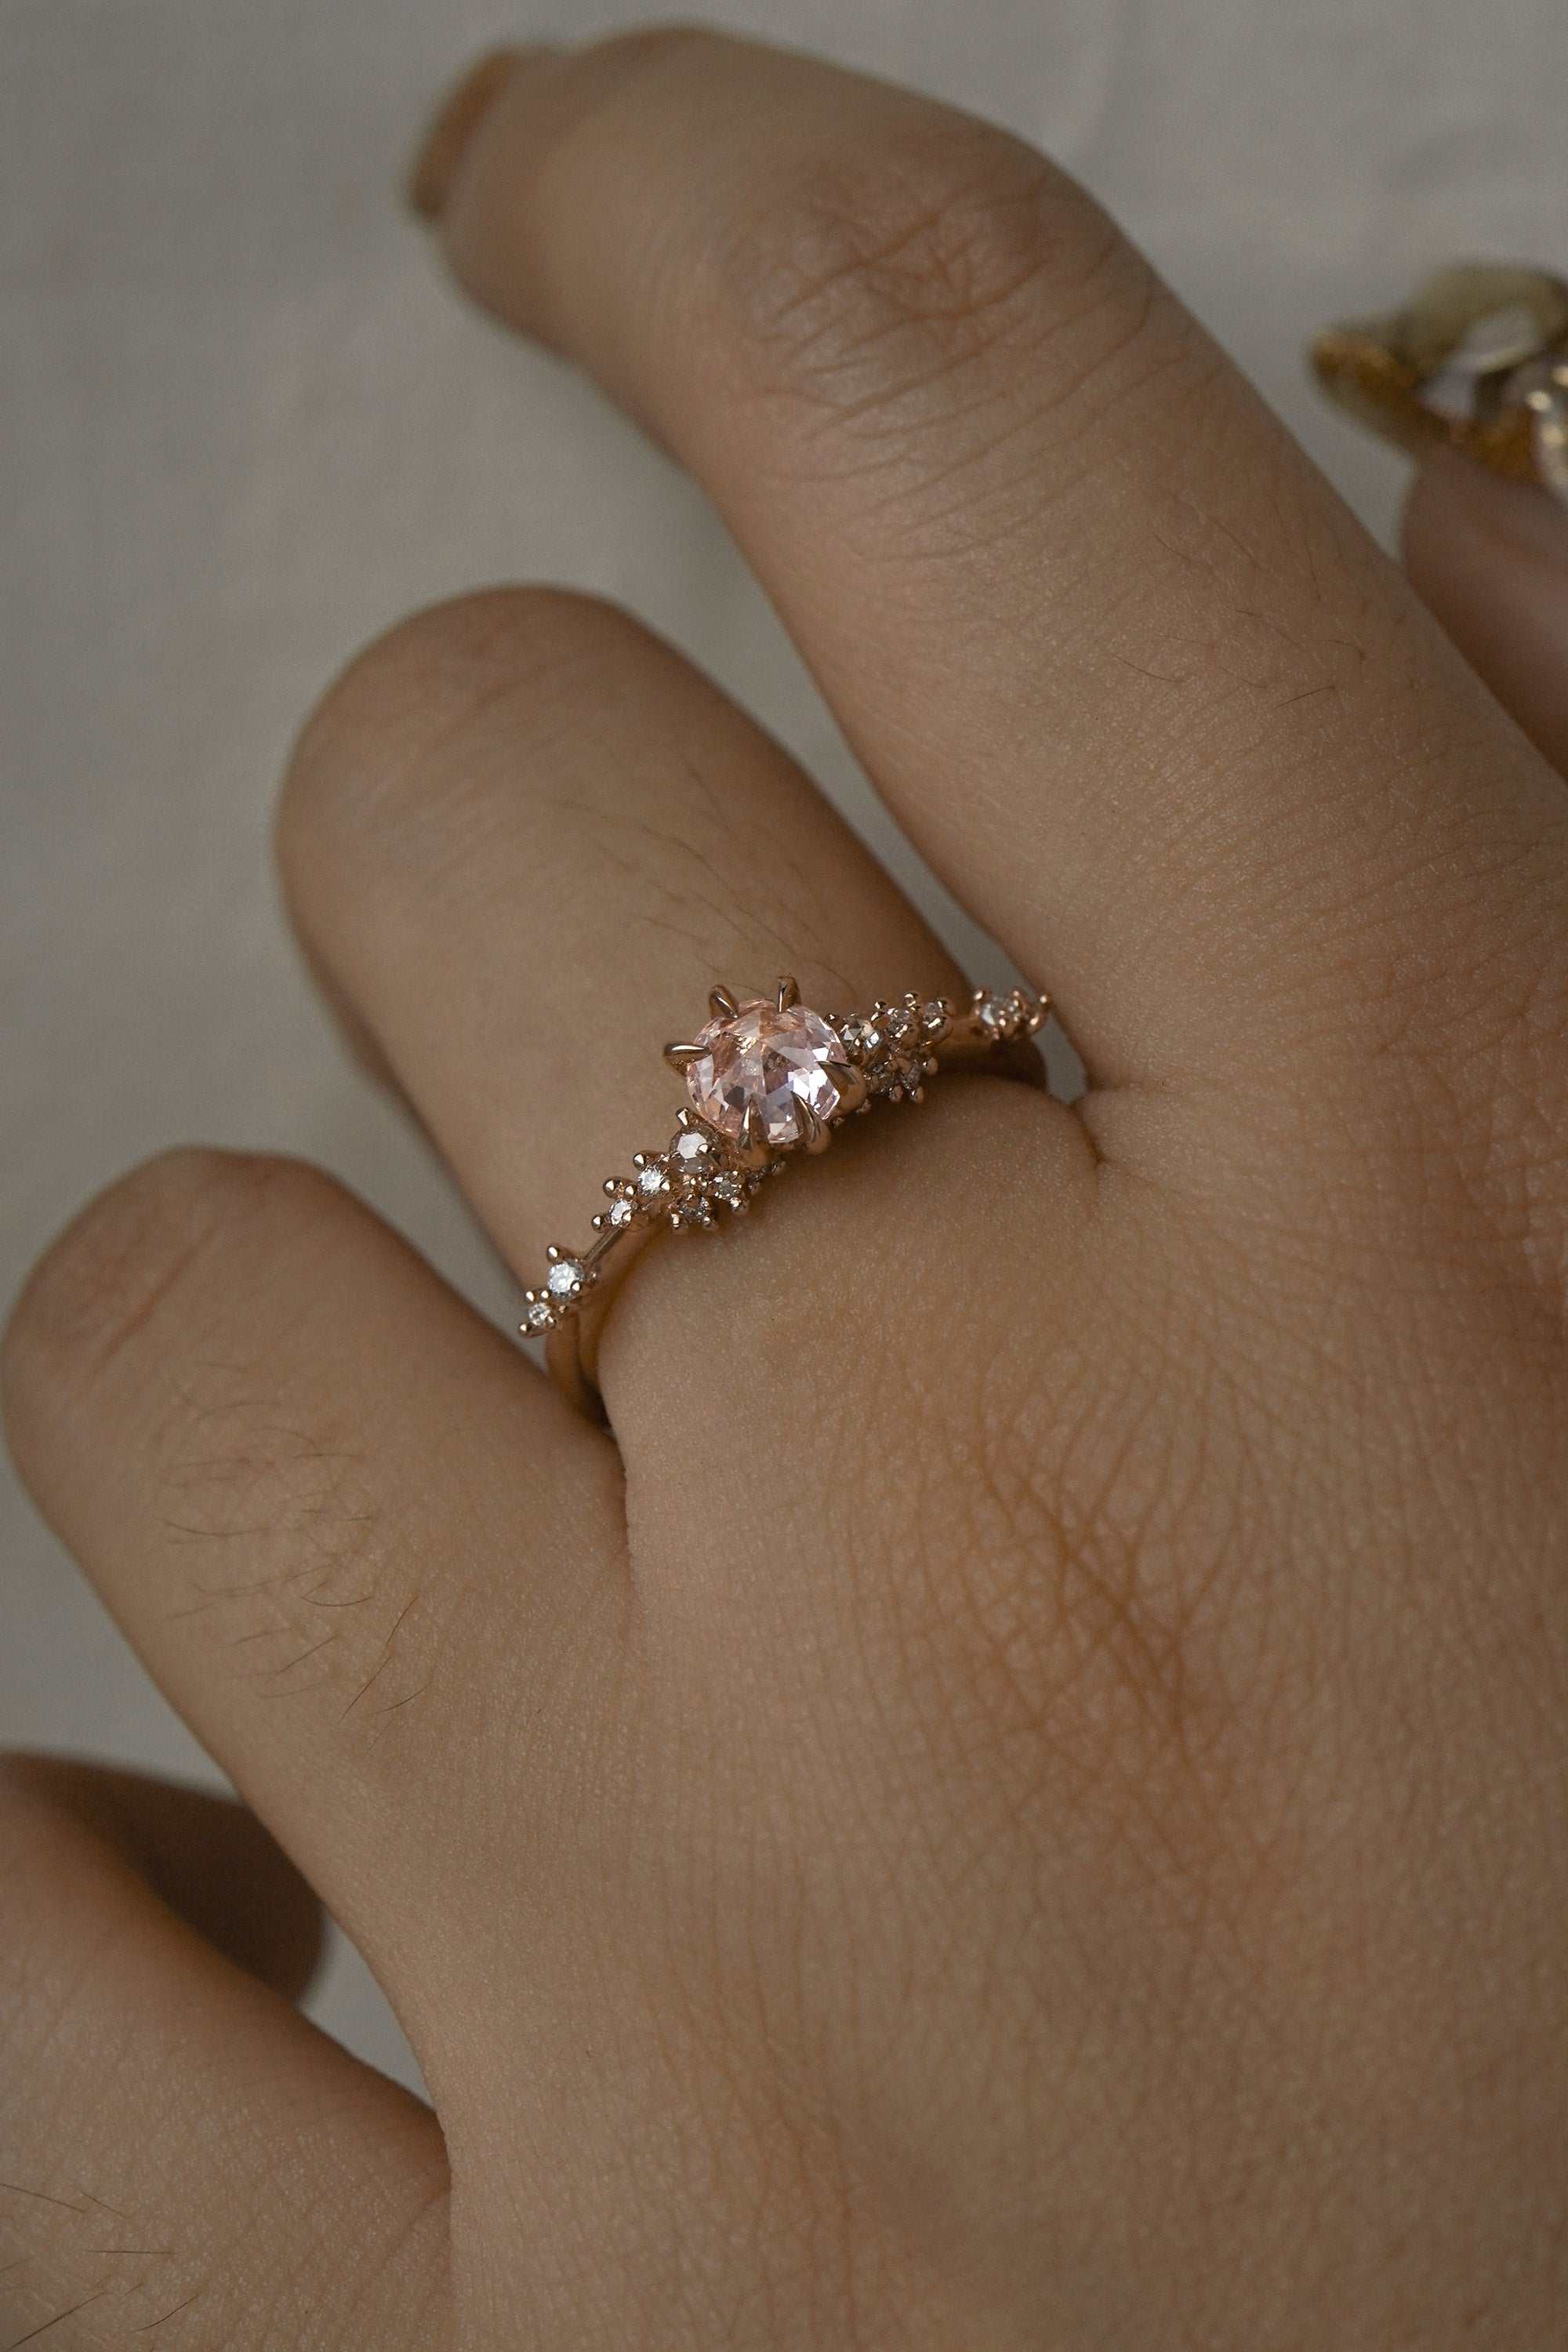 A delicate and ethereal hand-carved one of a kind "Daphne" style engagement ring by Laurie Fleming Jewellery. The ring features a rose cut pale pink sapphire centre, with clusters of rose and brilliant cut diamond accents on the band in solid 14k rose gold. The ring is worn on a hand against a light grey background.